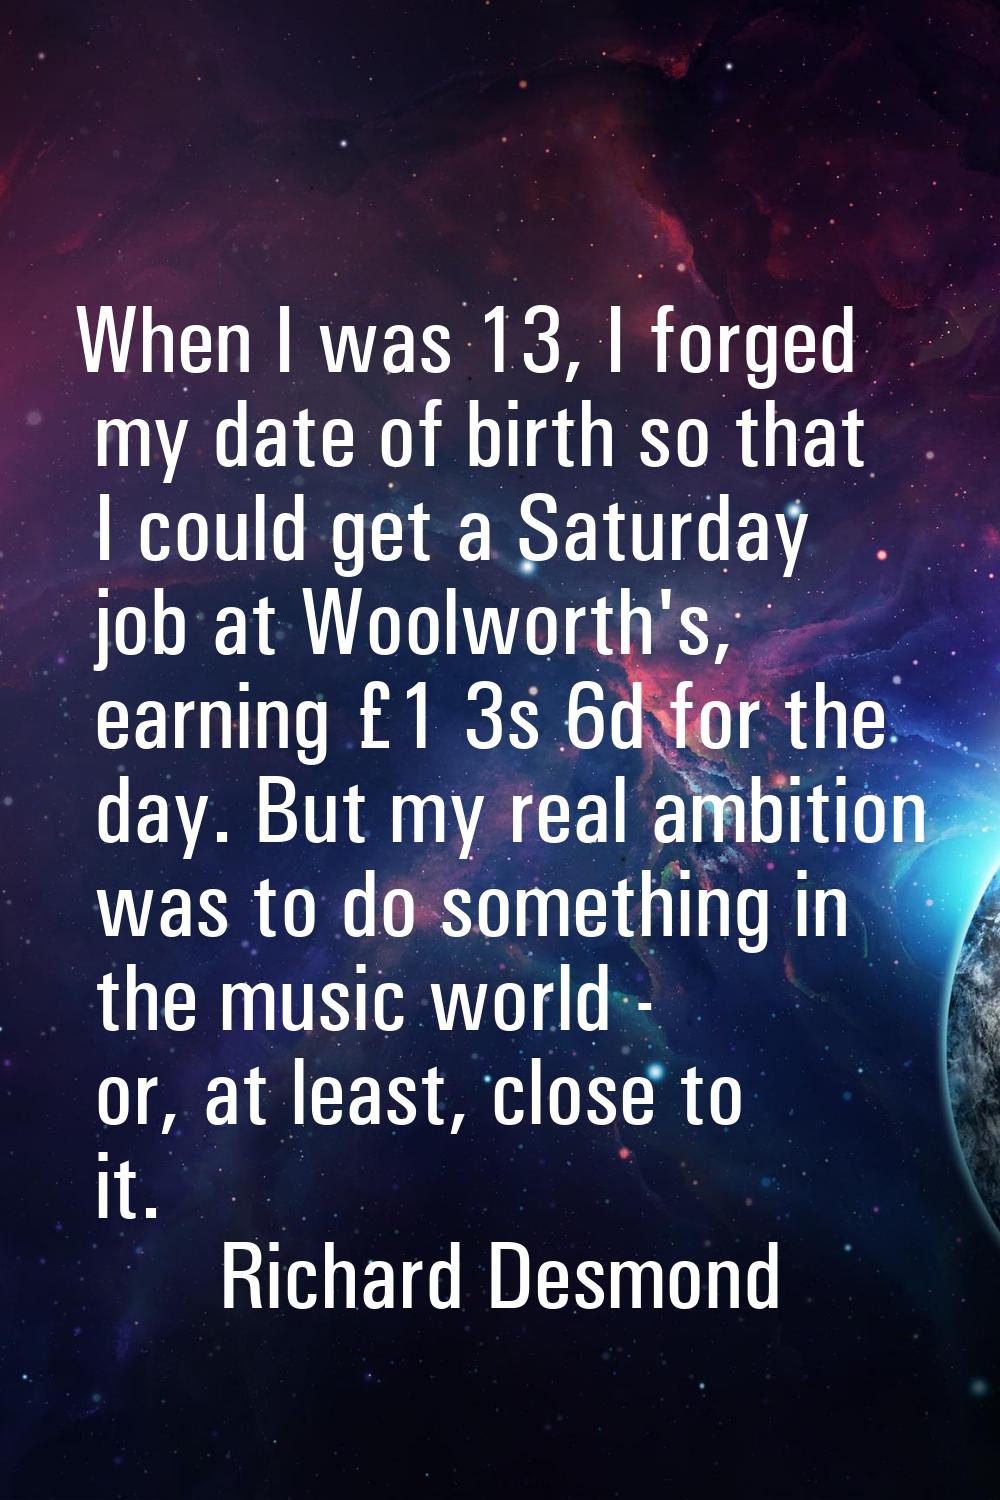 When I was 13, I forged my date of birth so that I could get a Saturday job at Woolworth's, earning